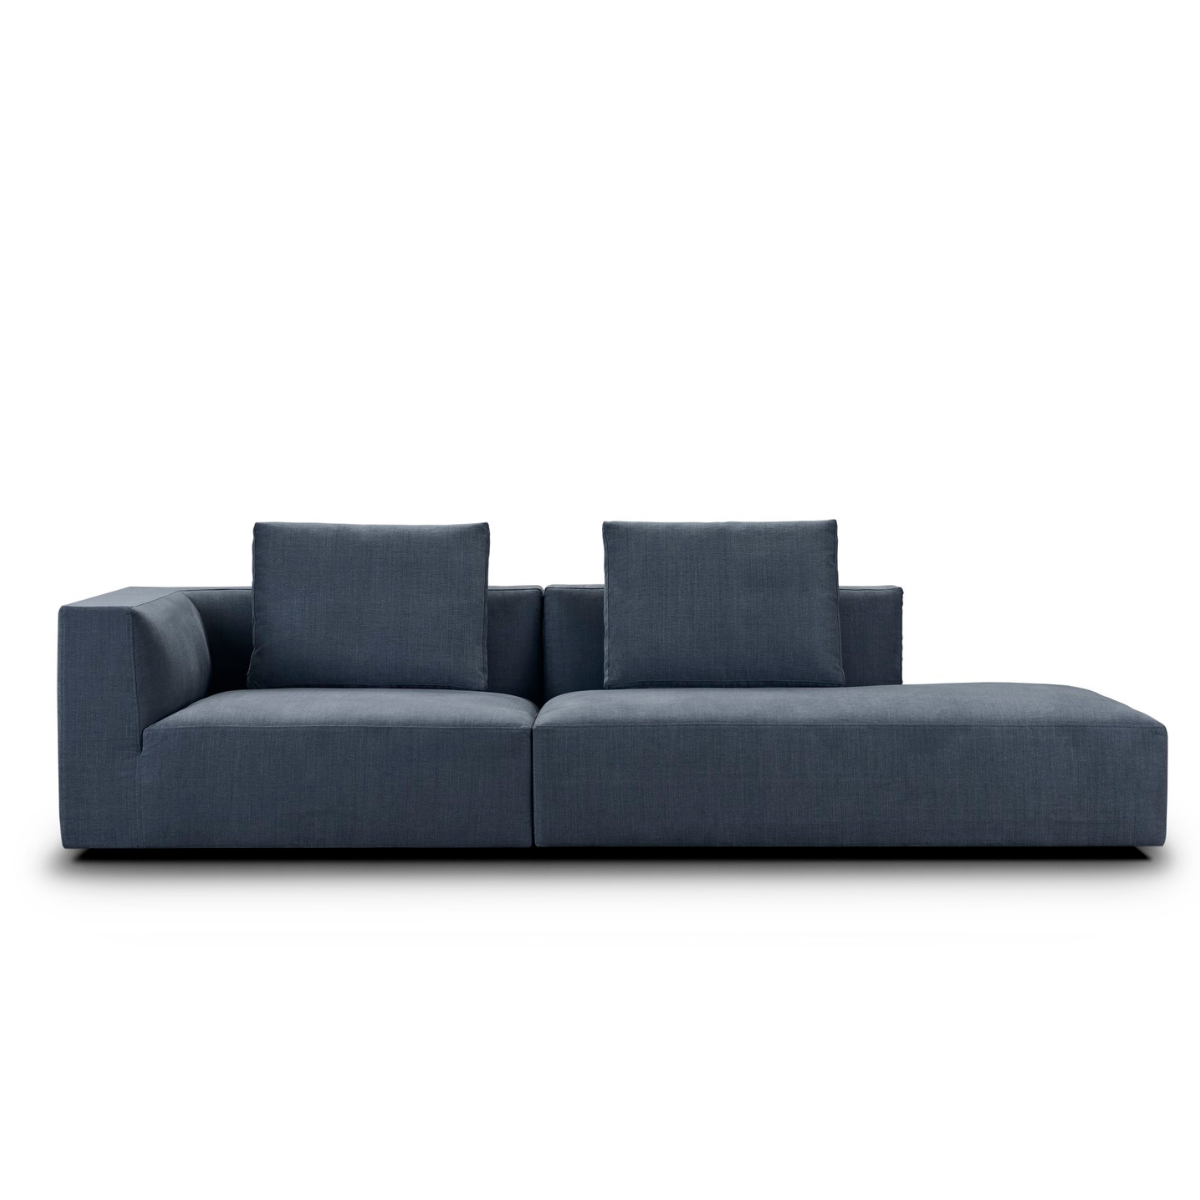 JUUL Furniture | 101 sofa - 2-personers med open end